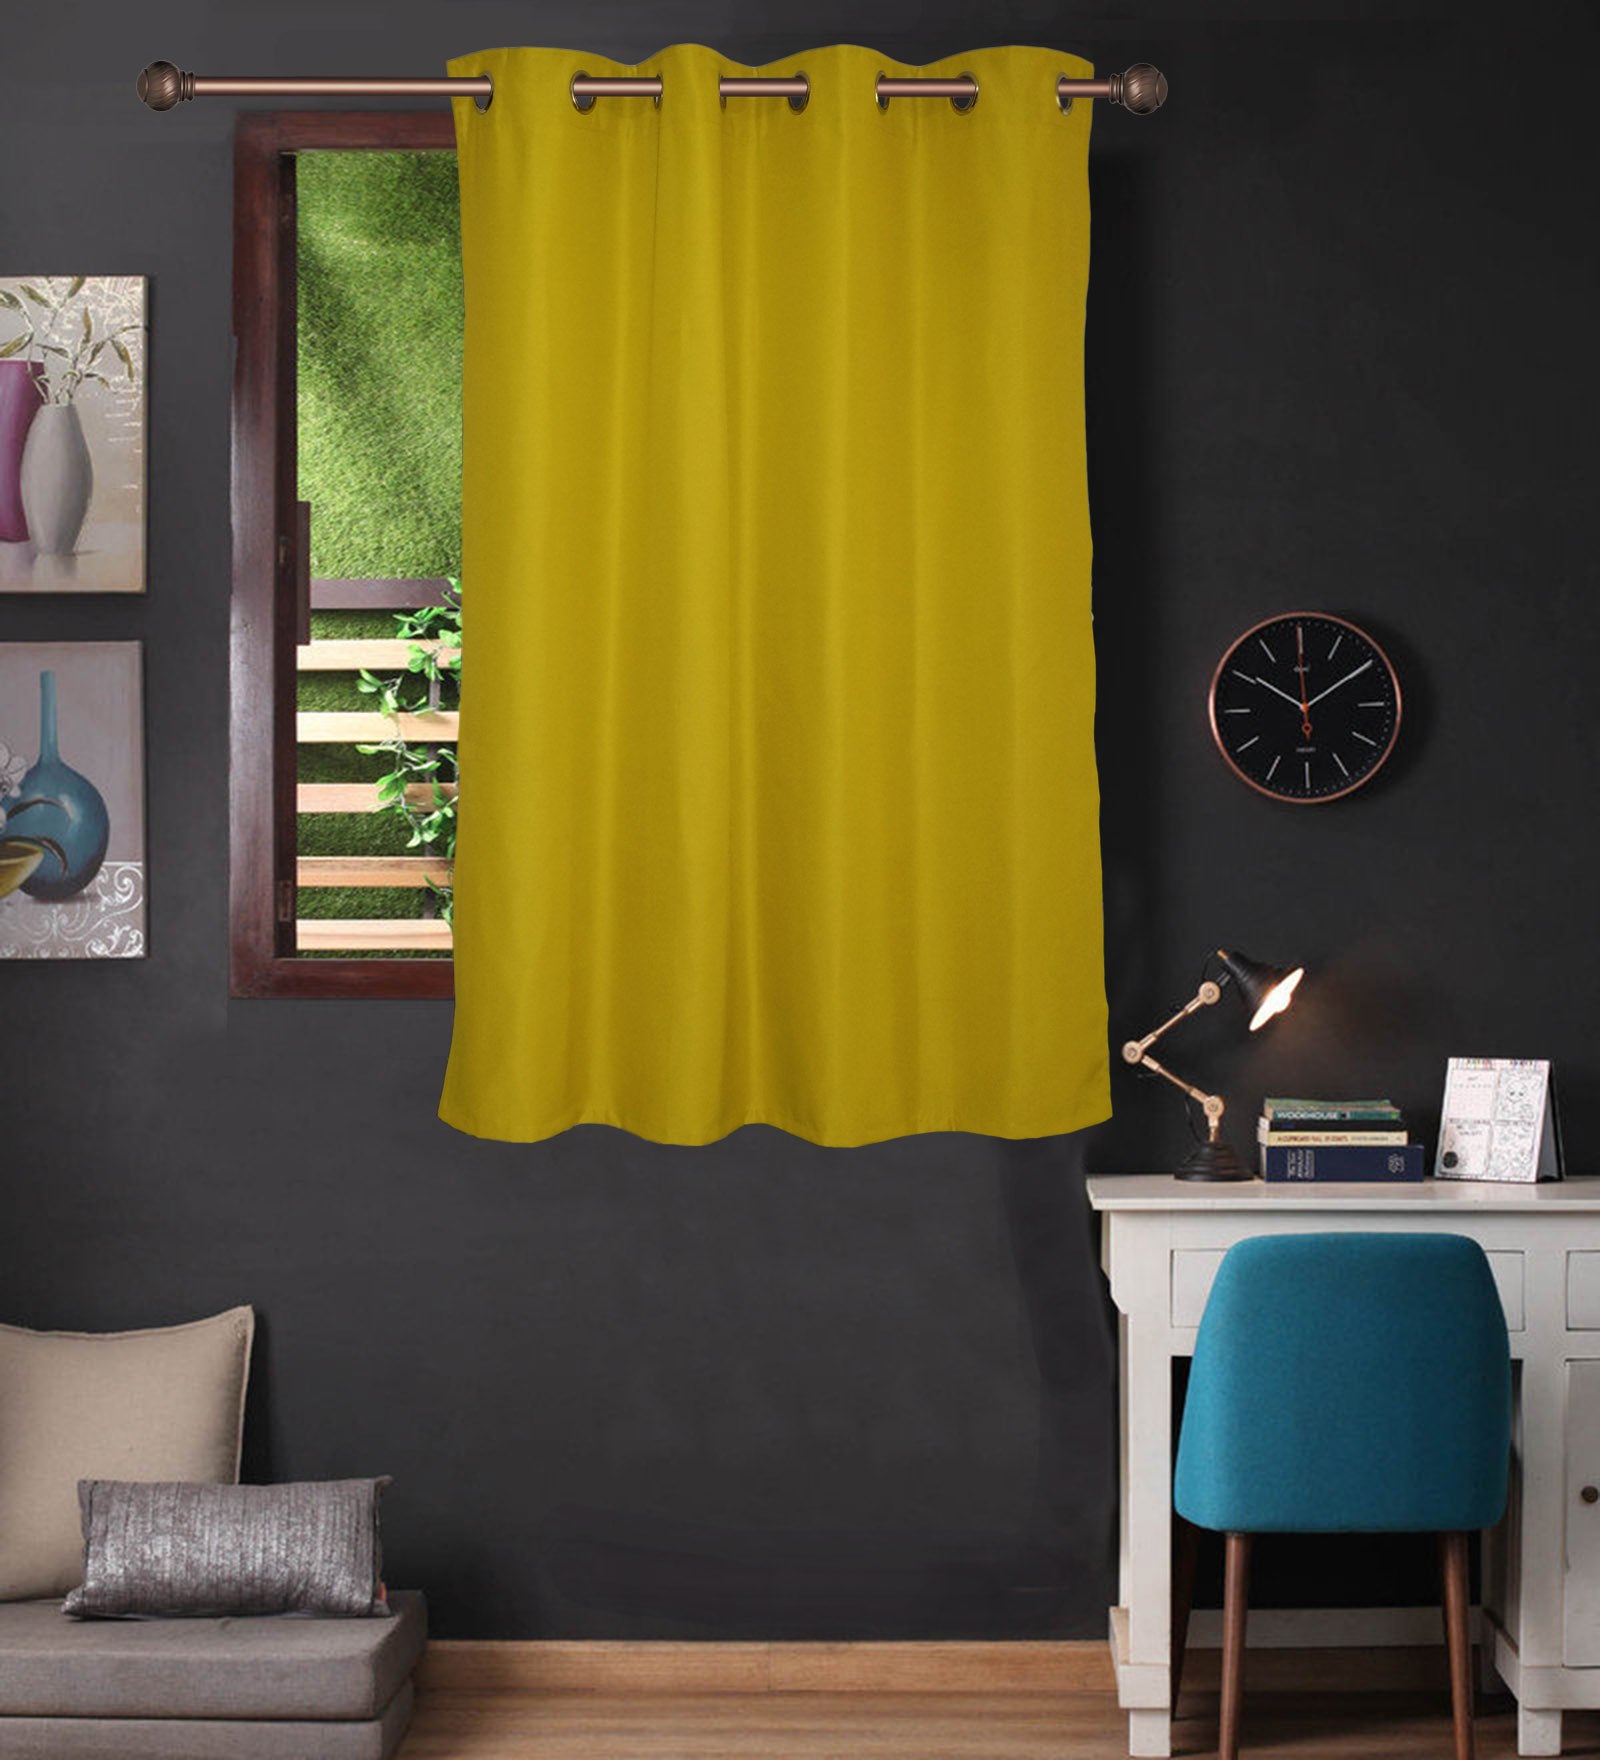 Lushomes outdoor curtains for balcony waterproof, curtains 5 feet long with 8 Metal Eyelets, 4.5 FT x 5 FT, curtains & drapes, Parda, Green (54 x 60 inches, Single pc)